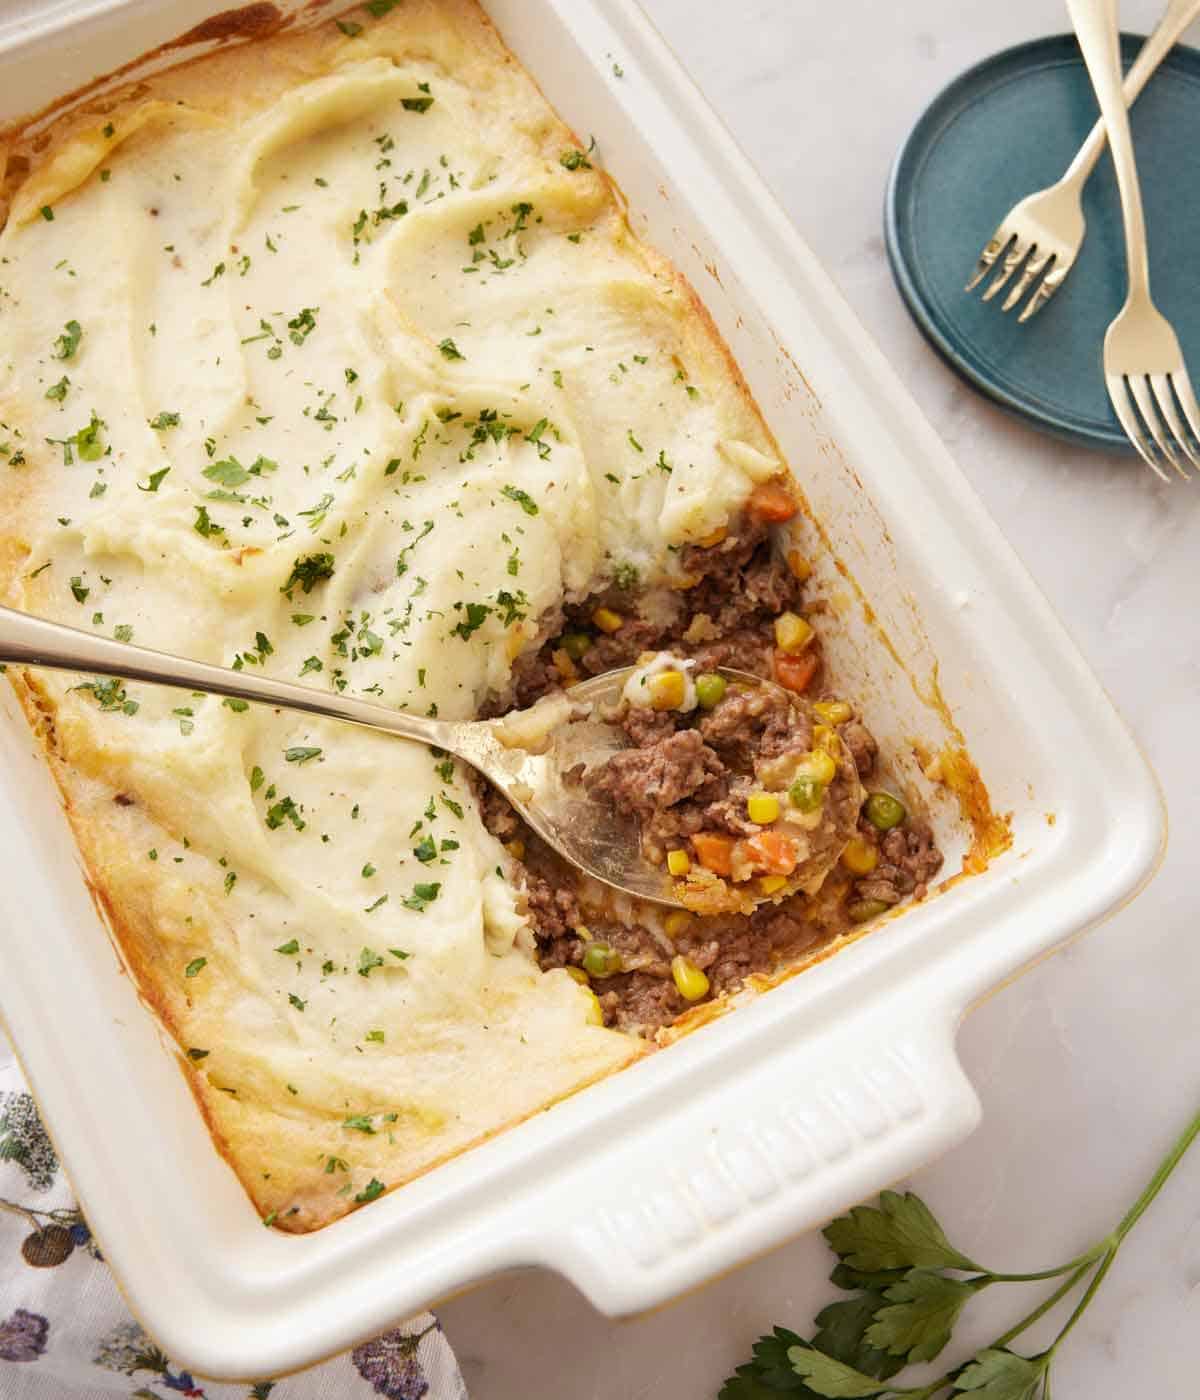 Overhead view of a baking dish with shepherd's pie with a serving scooped out.